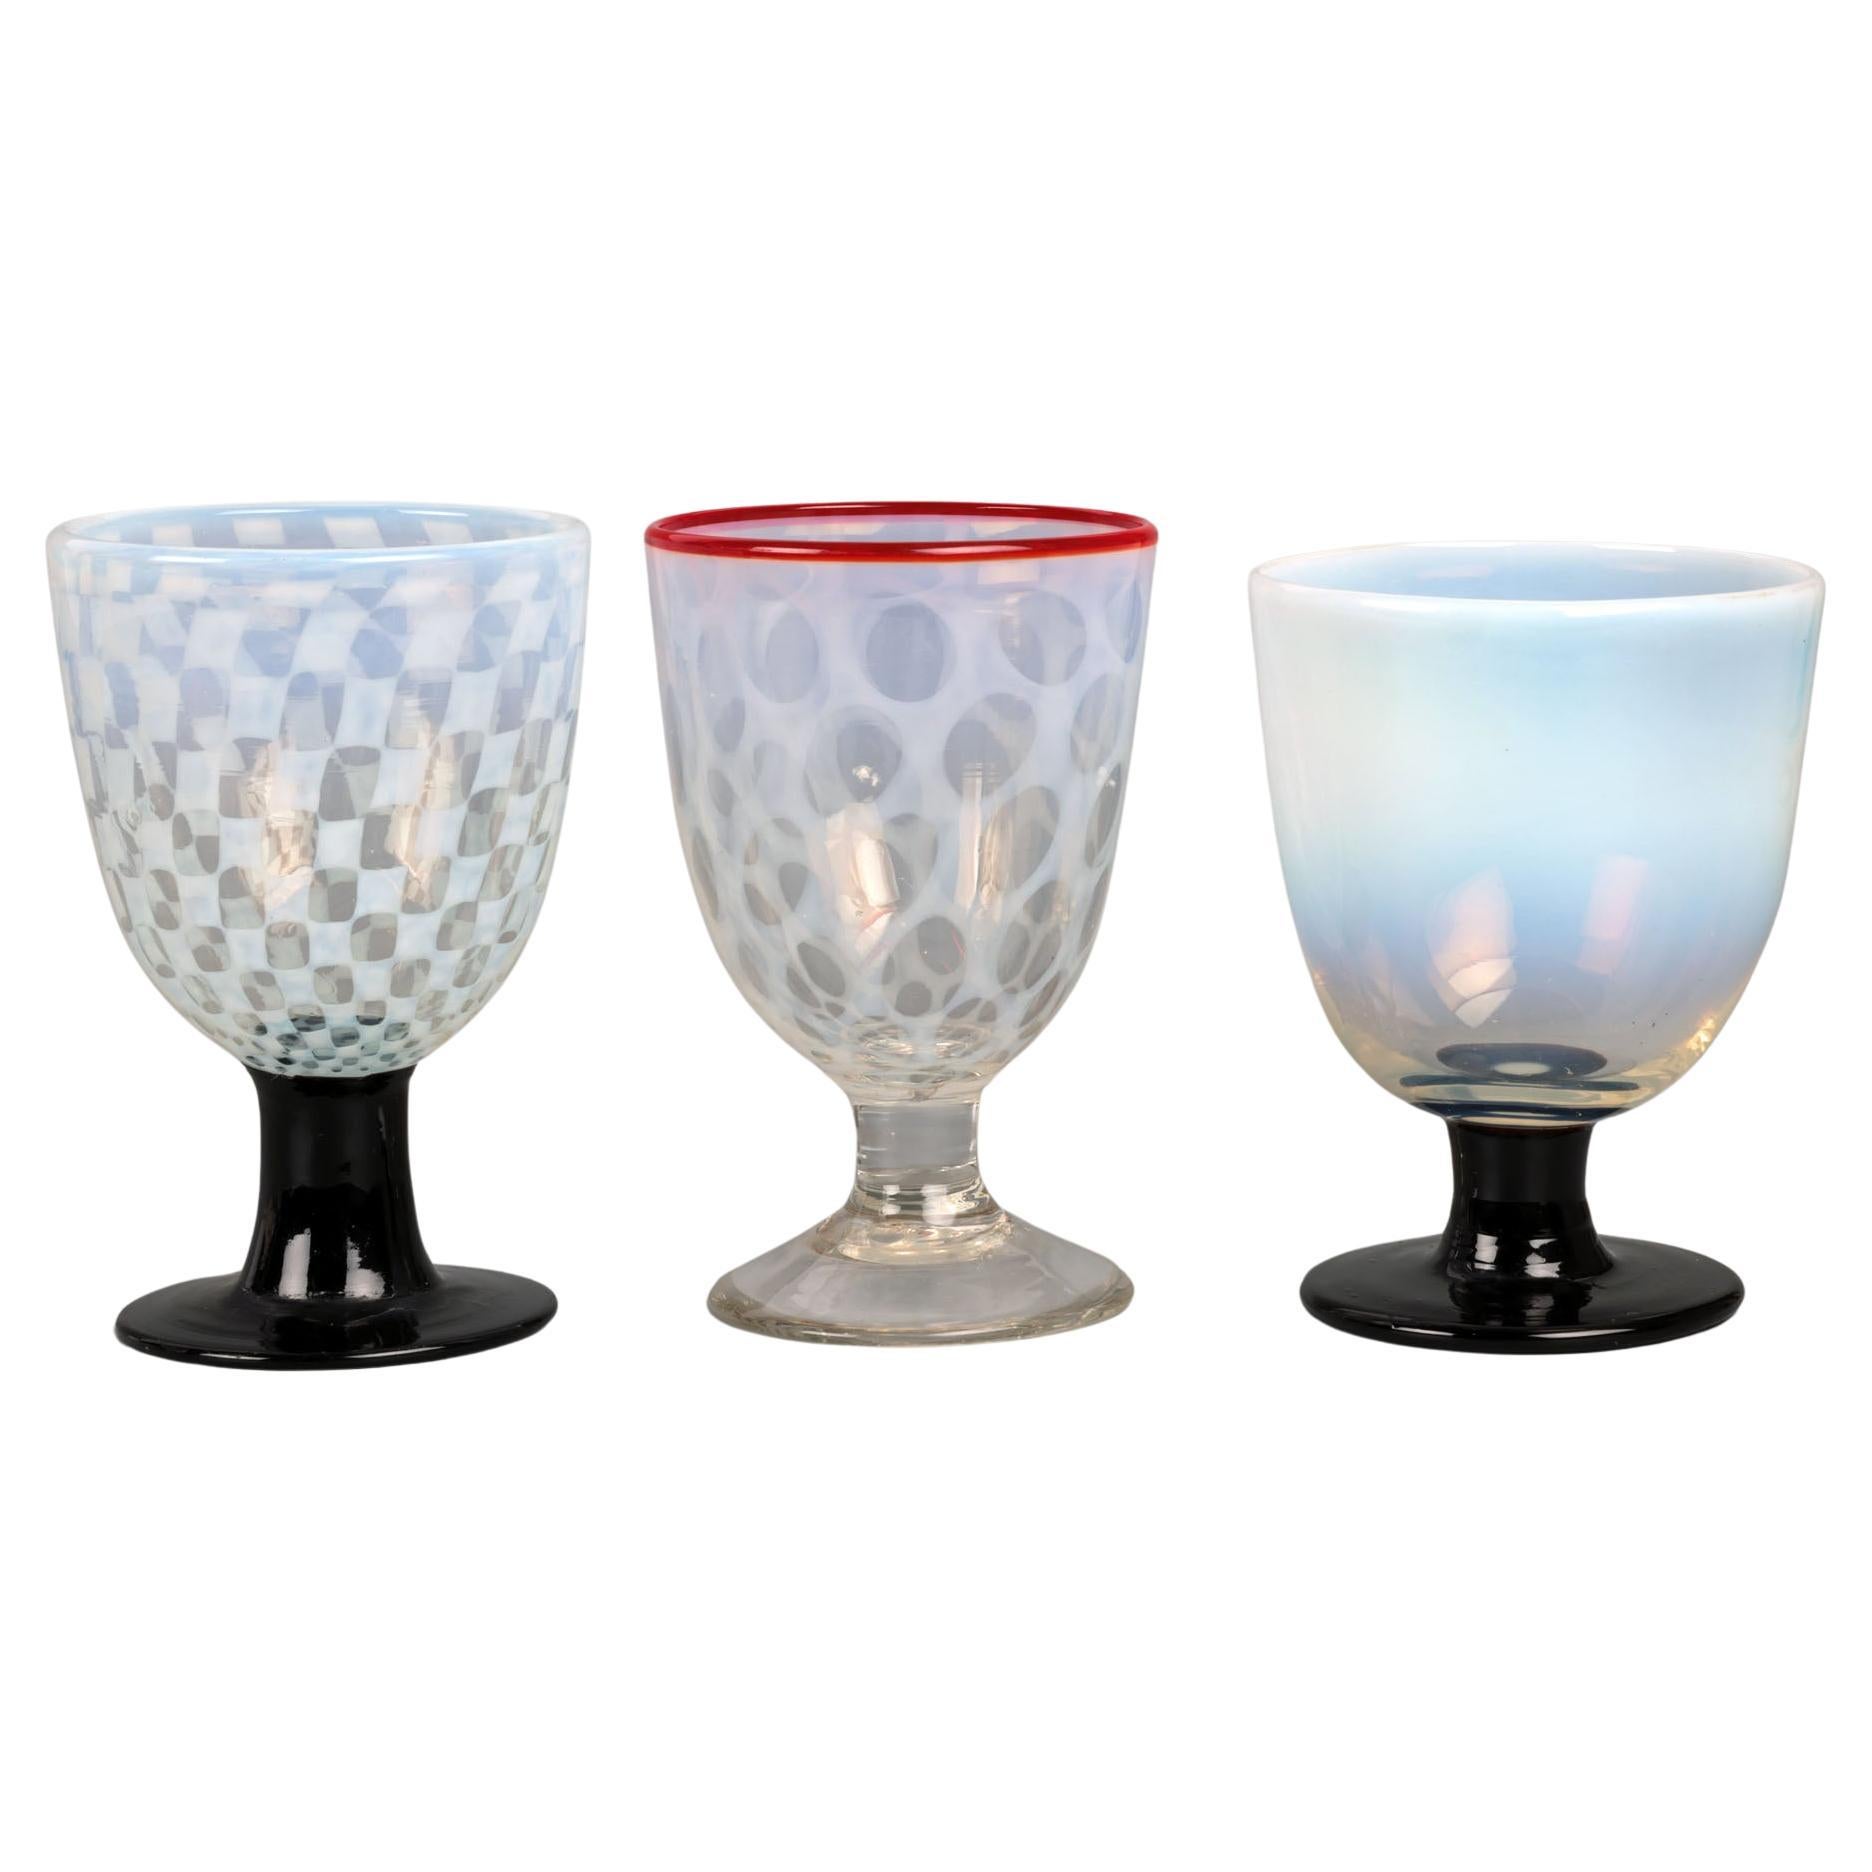 A scarce collection of three Japanese Meiji ice cup drinking glasses 